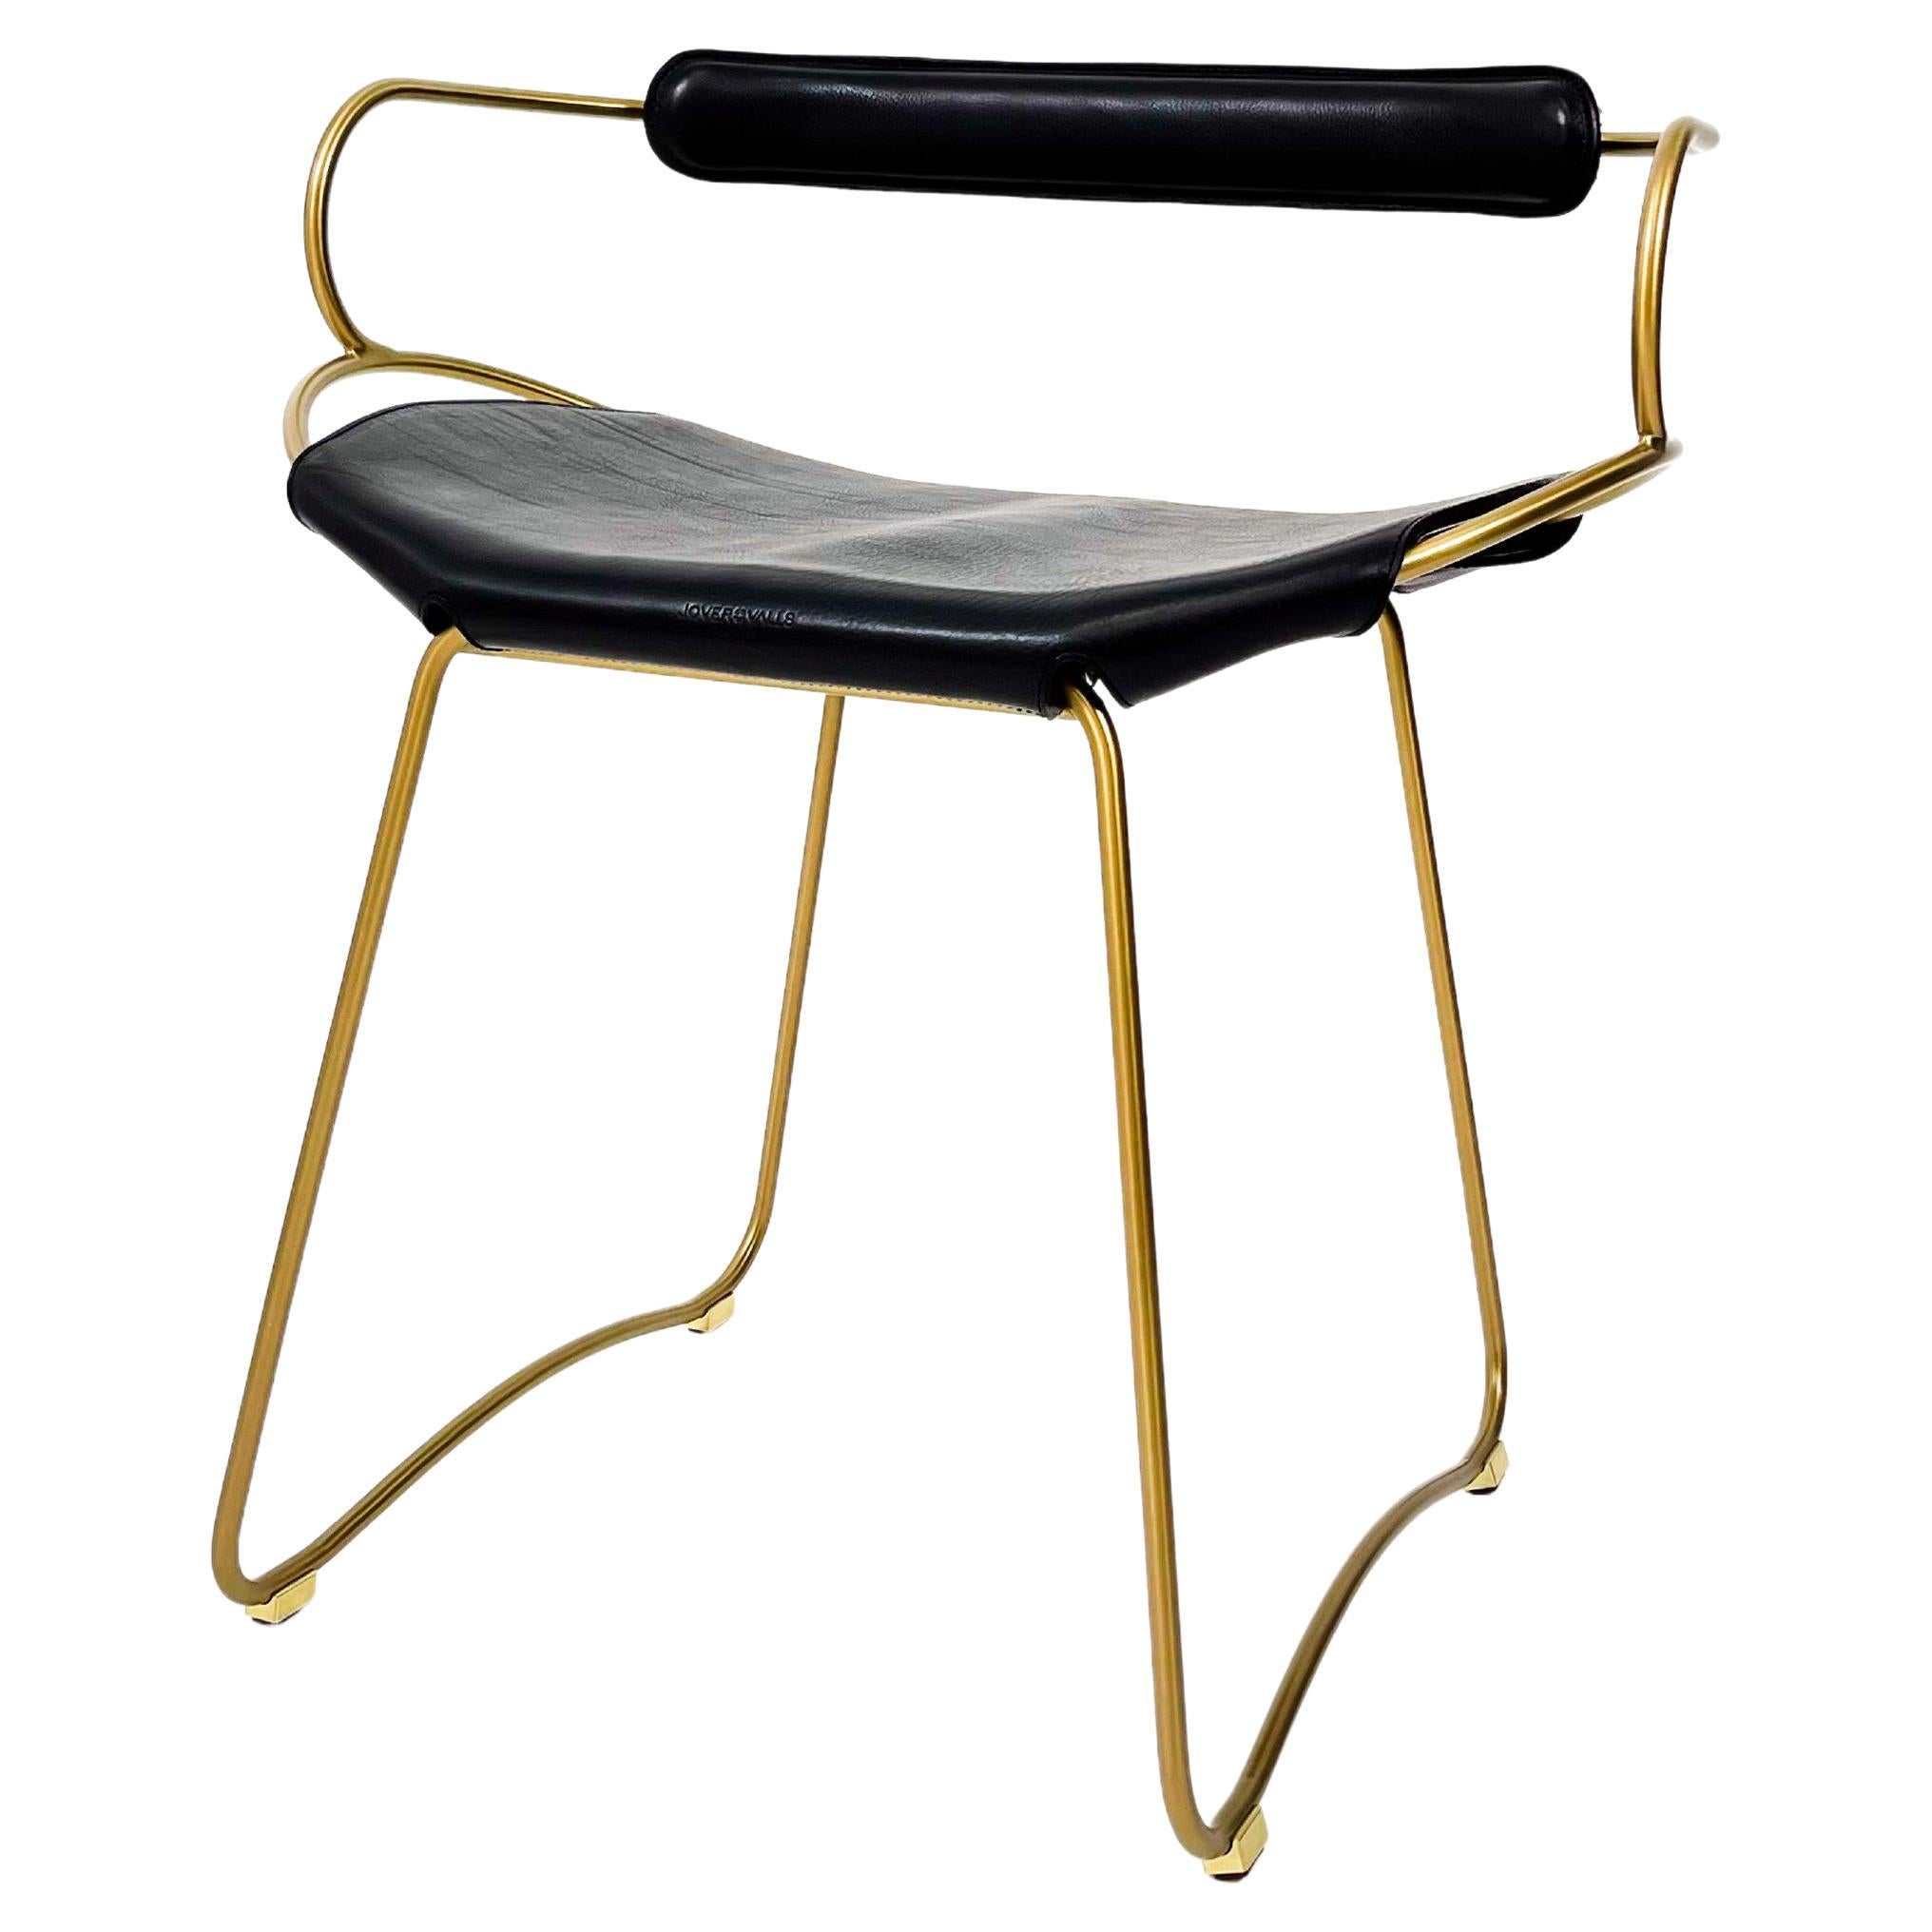 Contemporary Table Bar Stool w Backrest Aged Brass Metal & Black Leather Organic